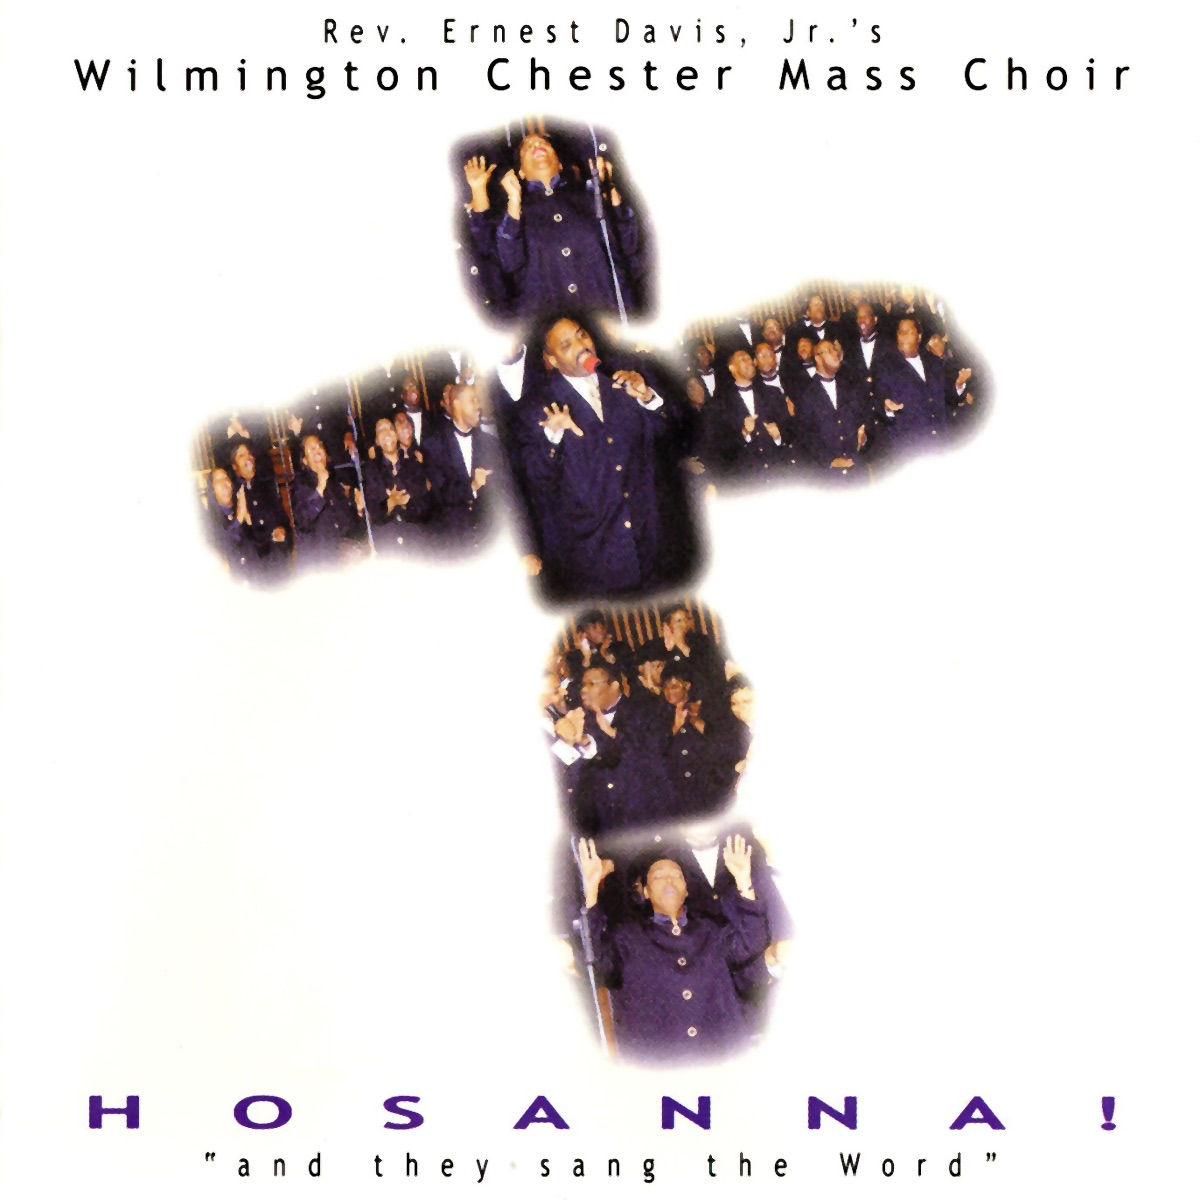 Art for You Can't Tell It (St. Mark 5:19) by The Wilmington Chester Mass Choir